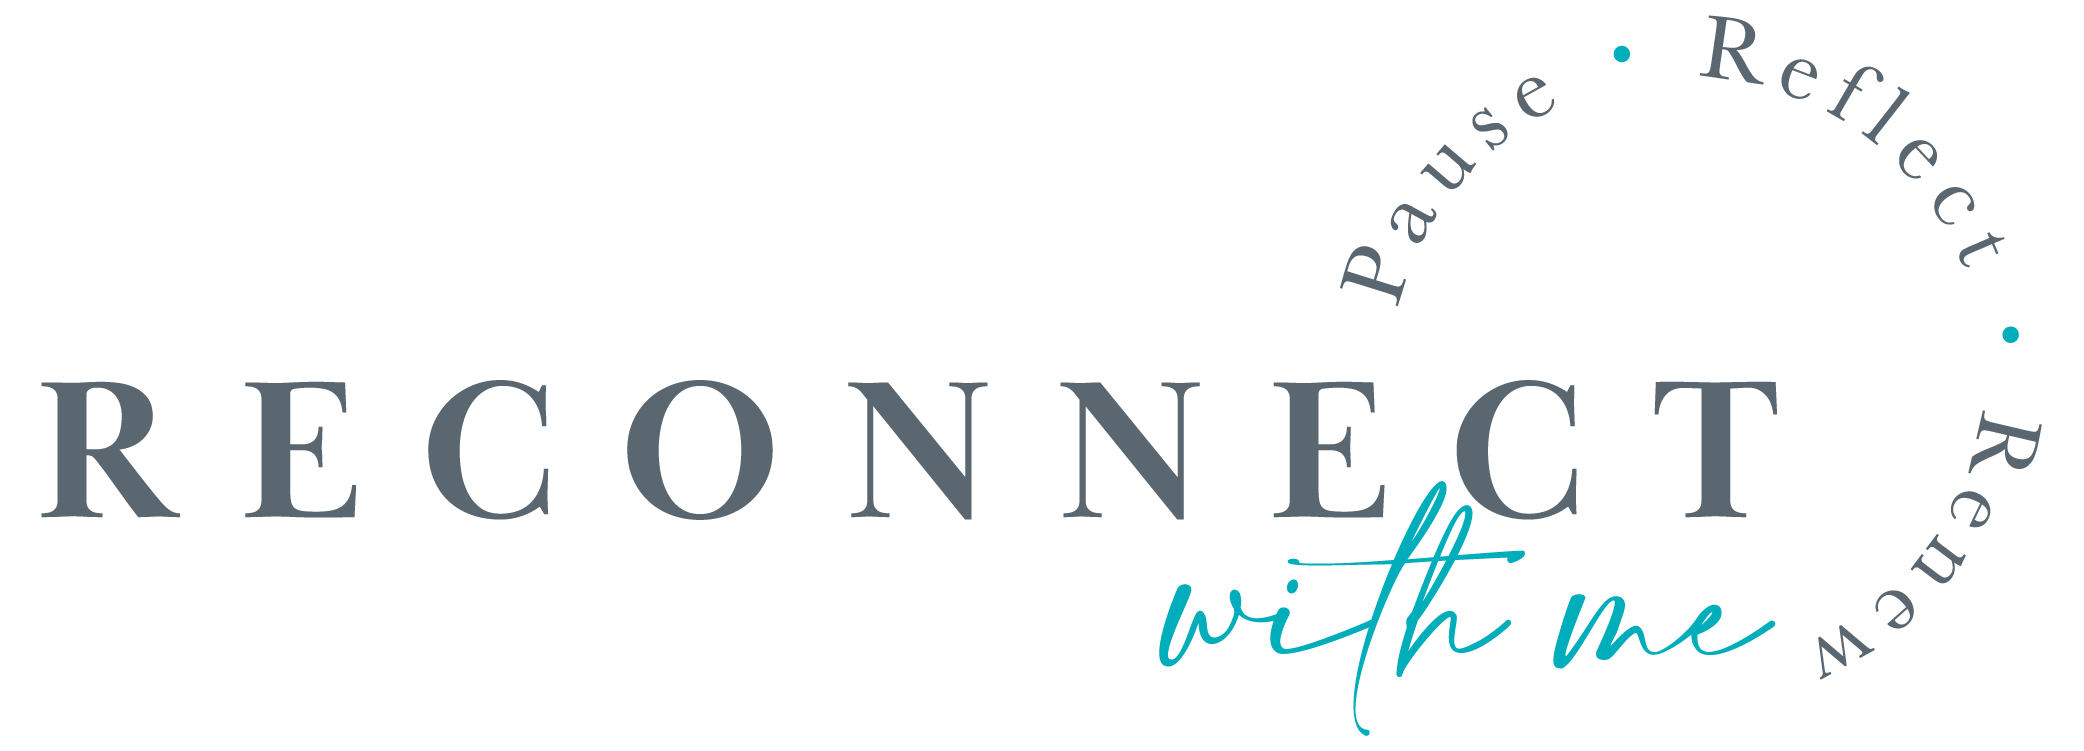 Reconnect with me - Logo